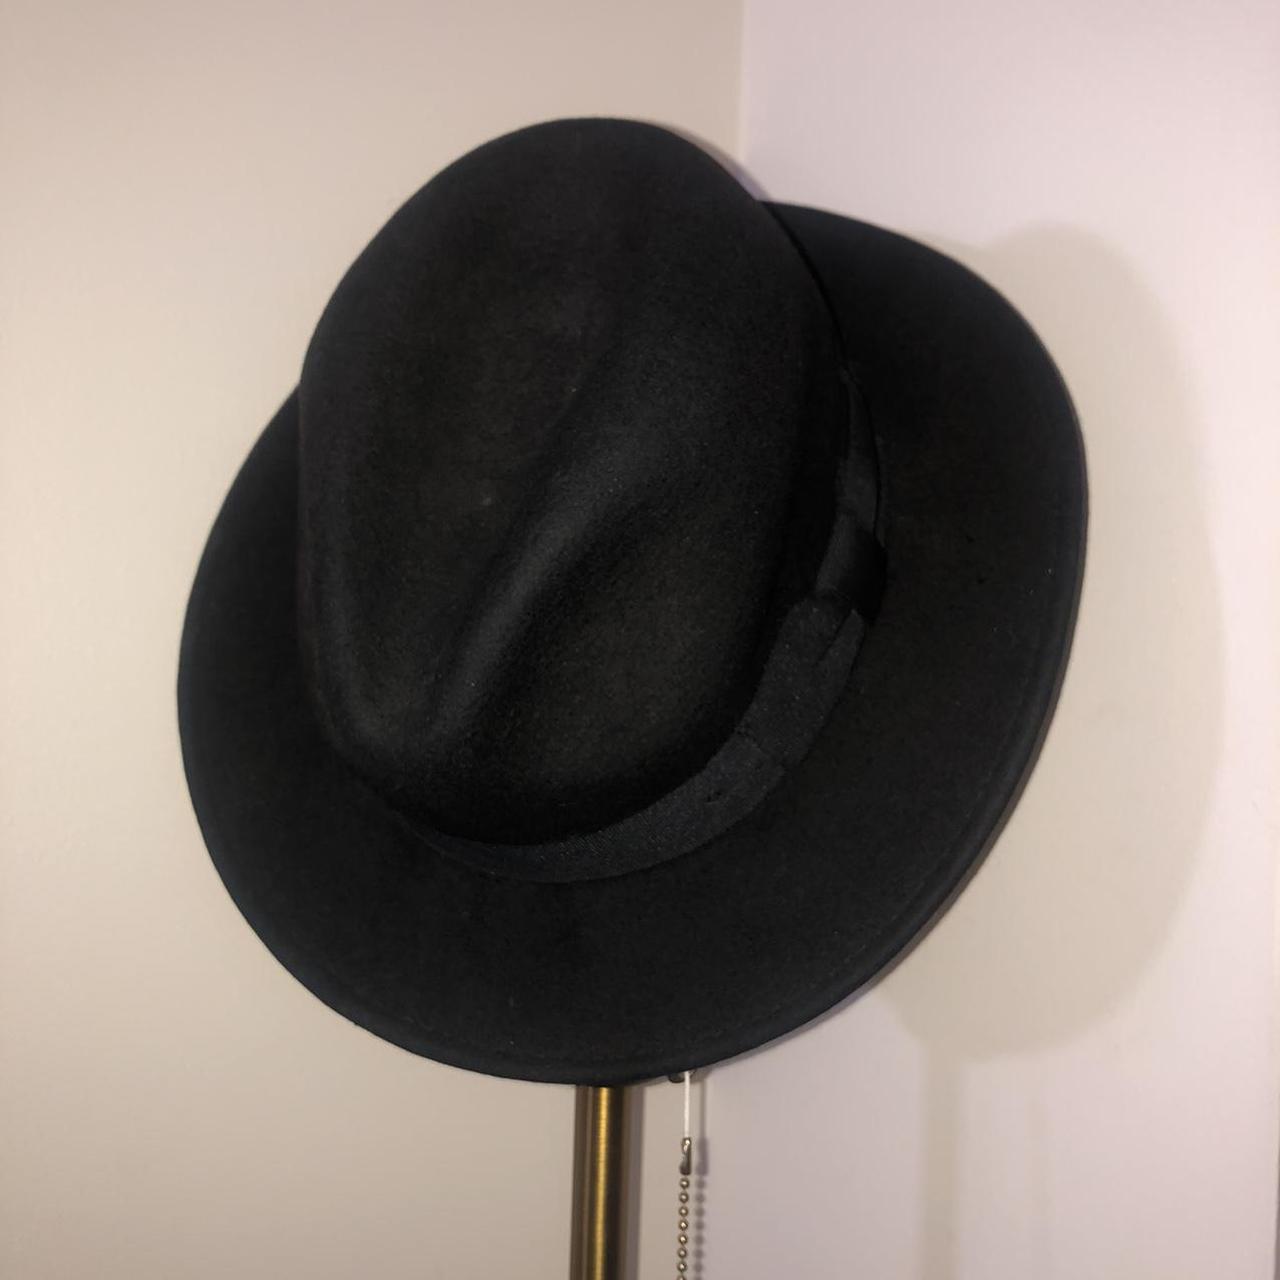 Product Image 1 - Black Top Hat 100% Wool
Has